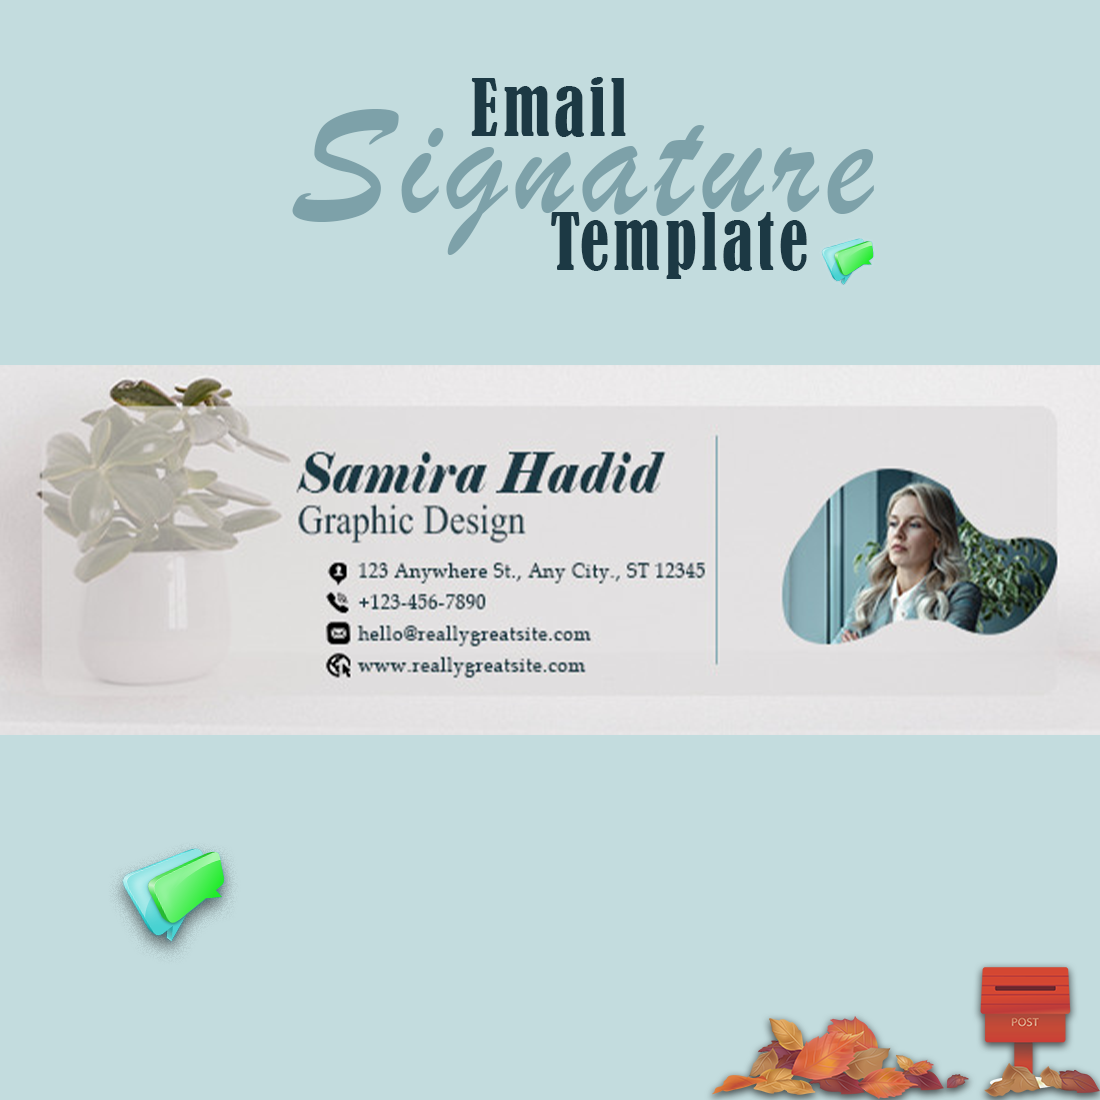 Email signature template design cover image.